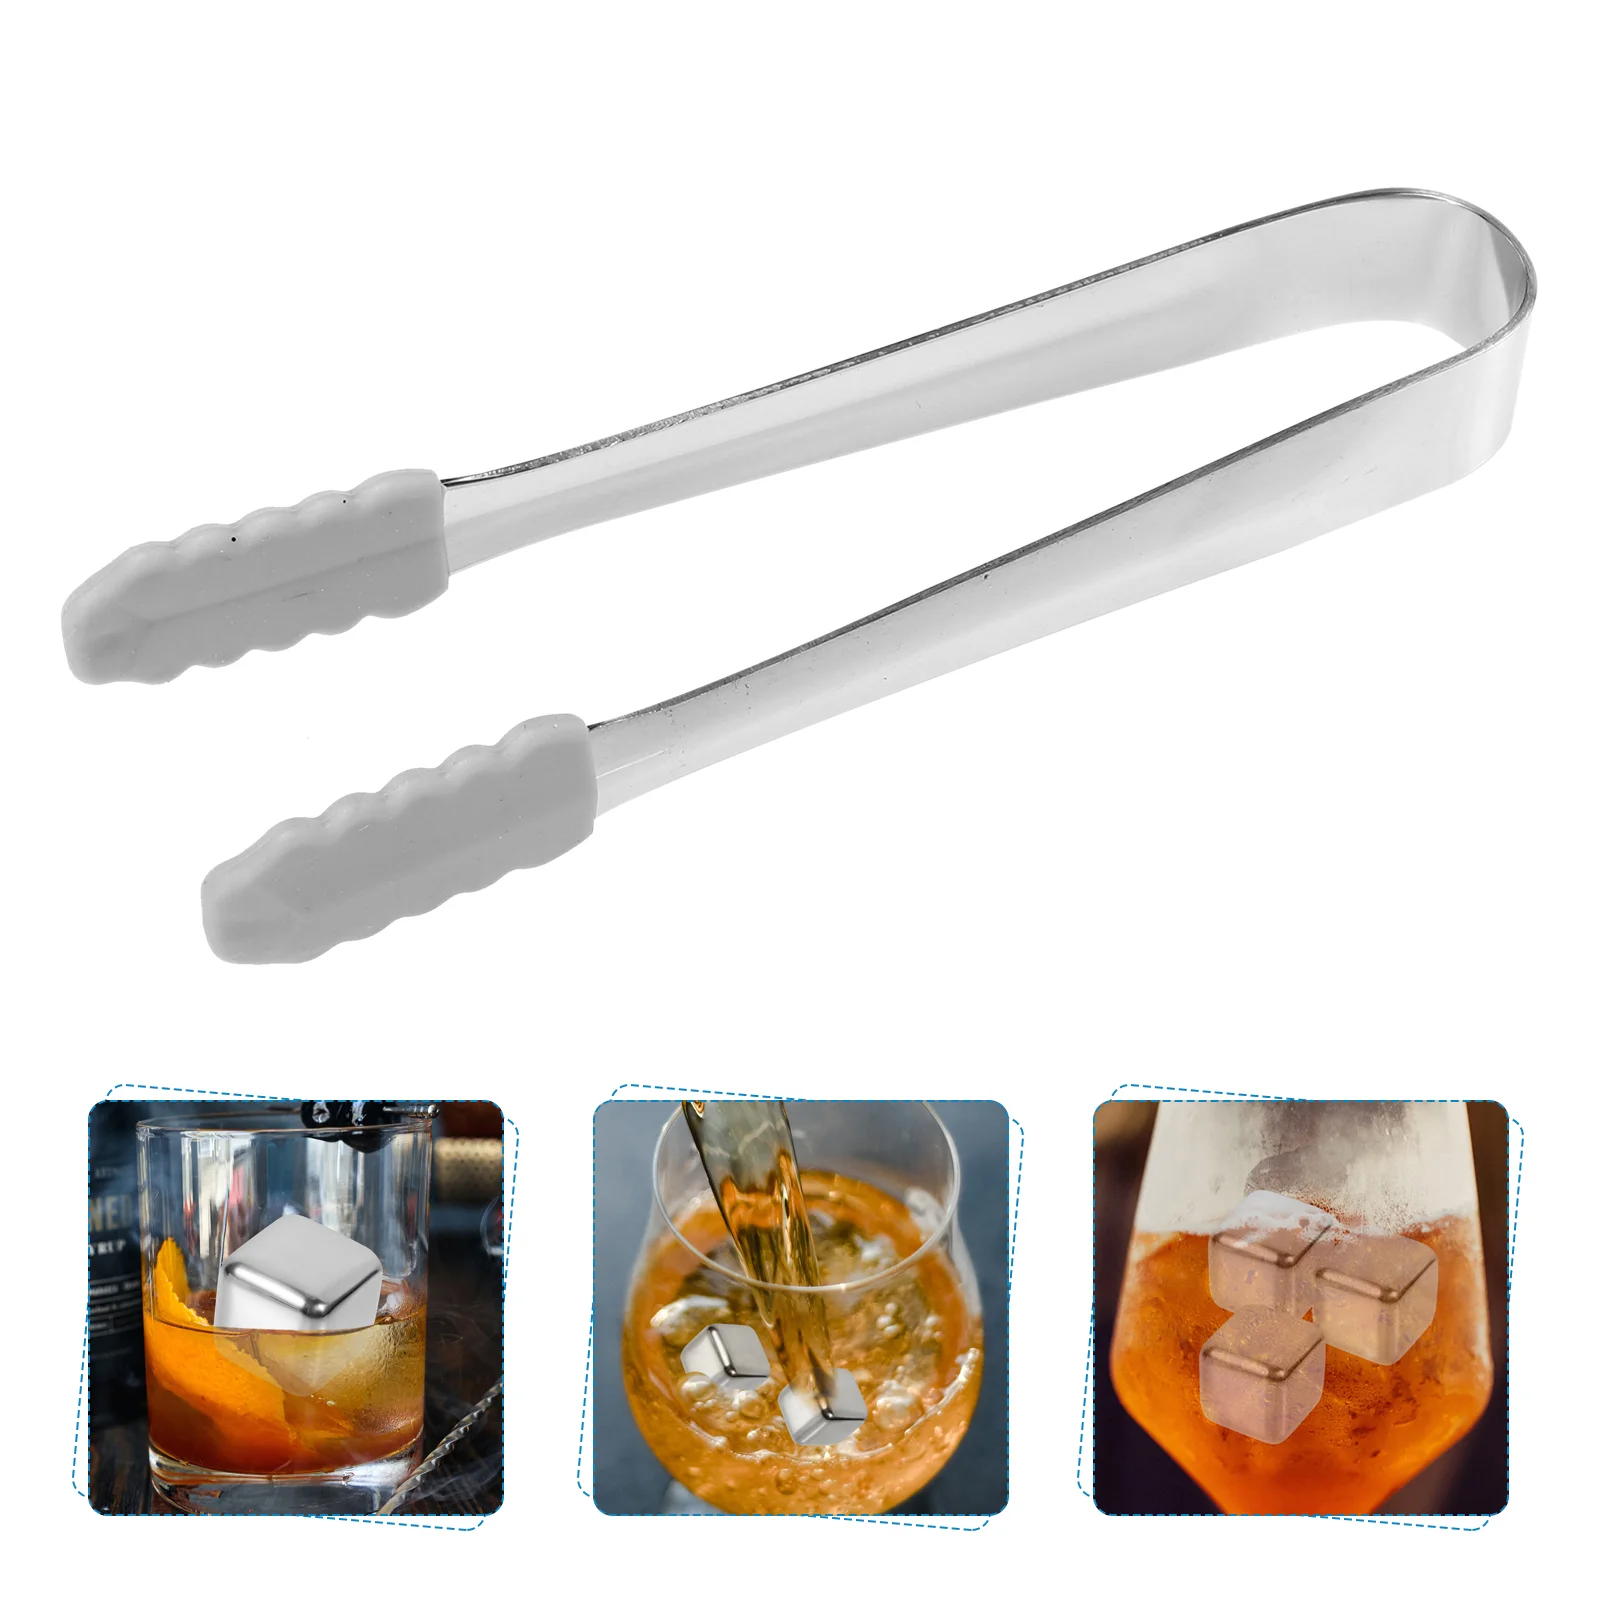 

Tongs Ice Serving Steel Stainless Mini Tong Cooking Sugar Food Salad Bread Steak Cube Metal Appetizers Kitchen Clamp Grill